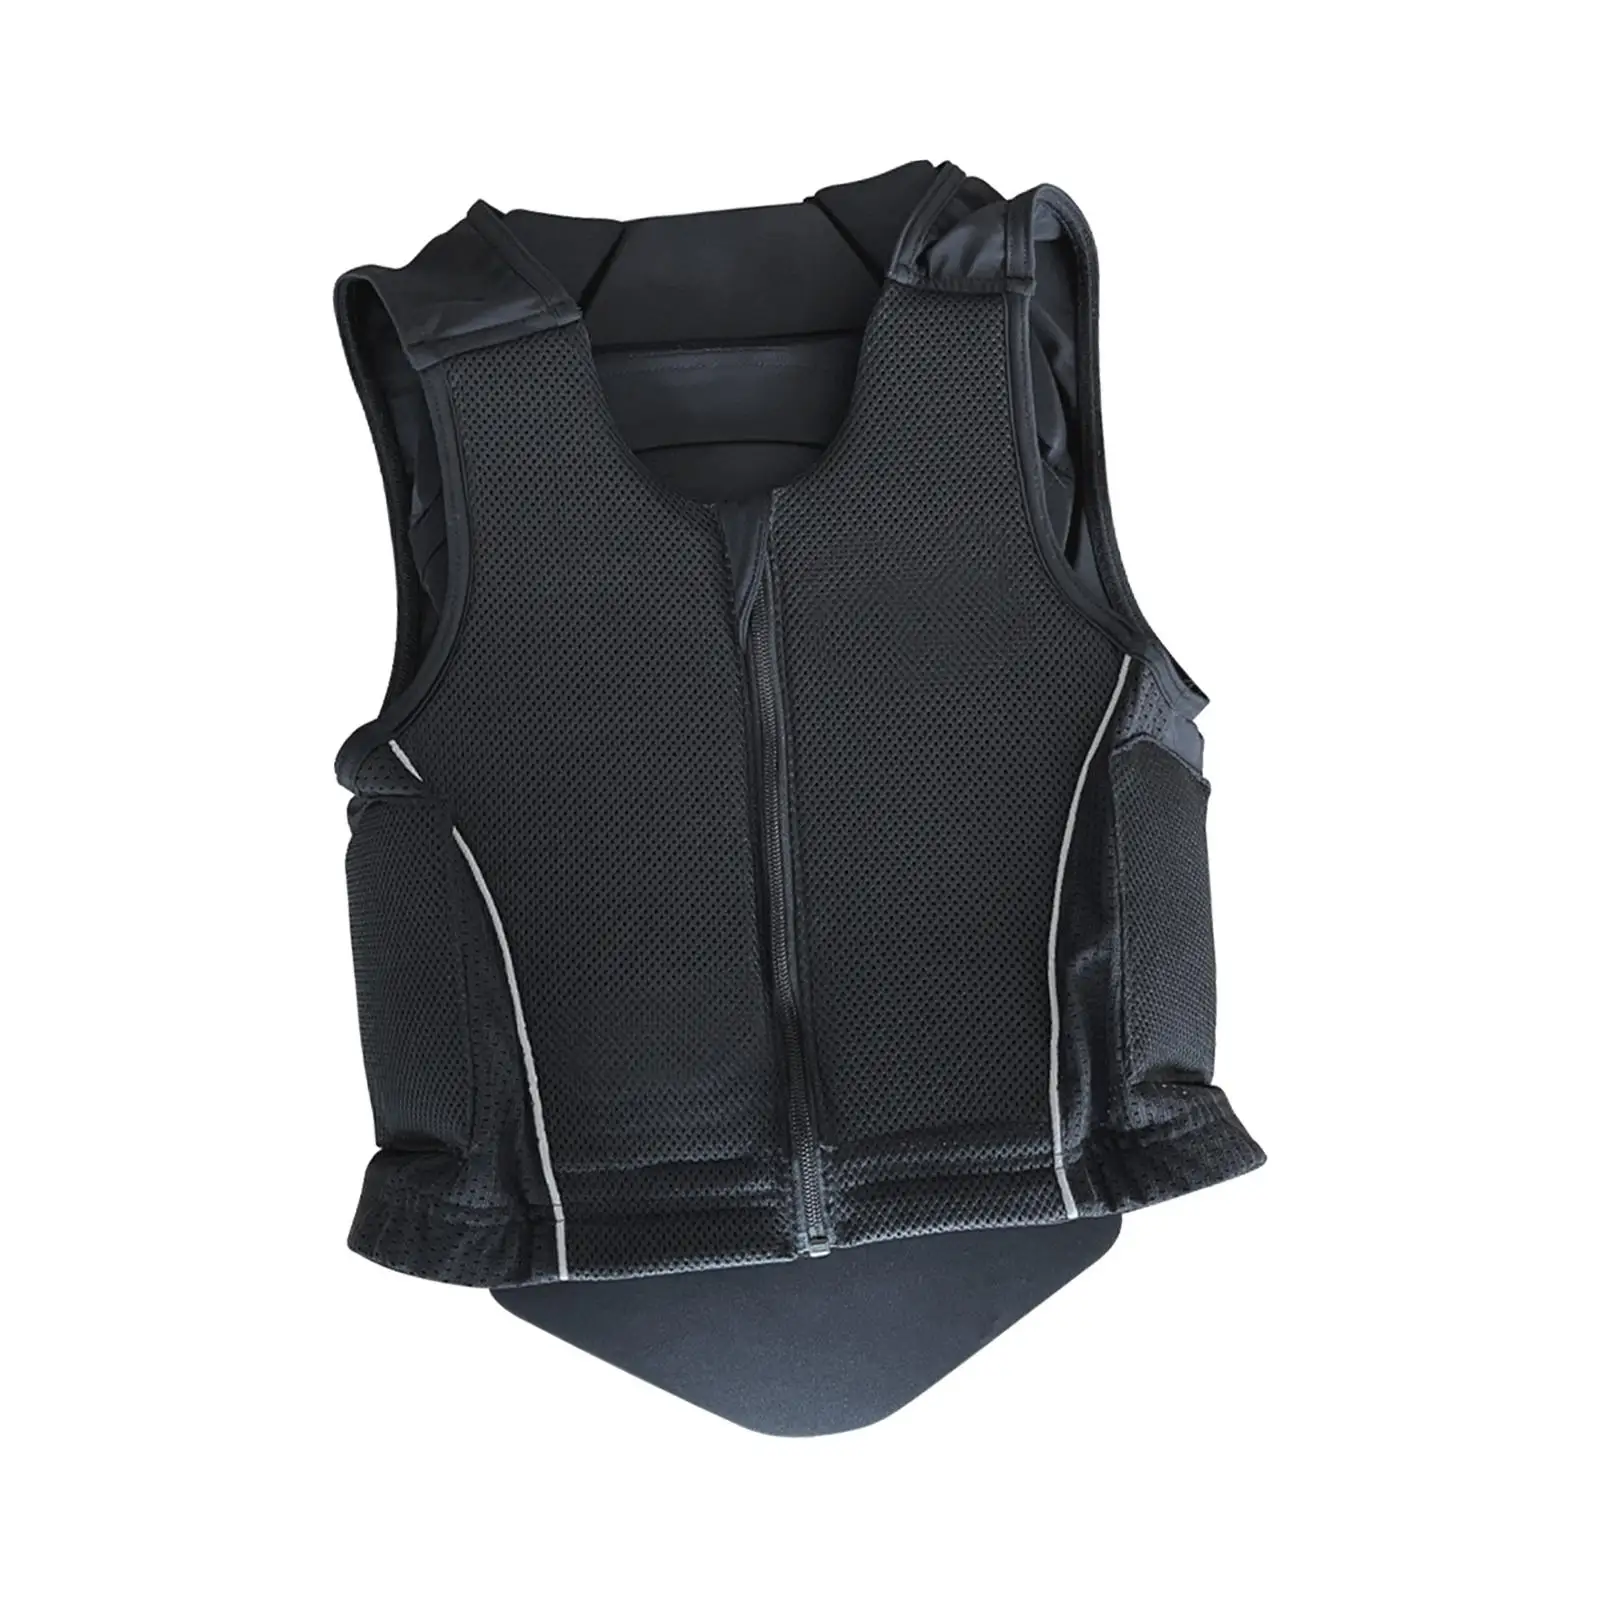 Equestrian Protective Body Protector Breathable EVA Padded Horse Riding Vest